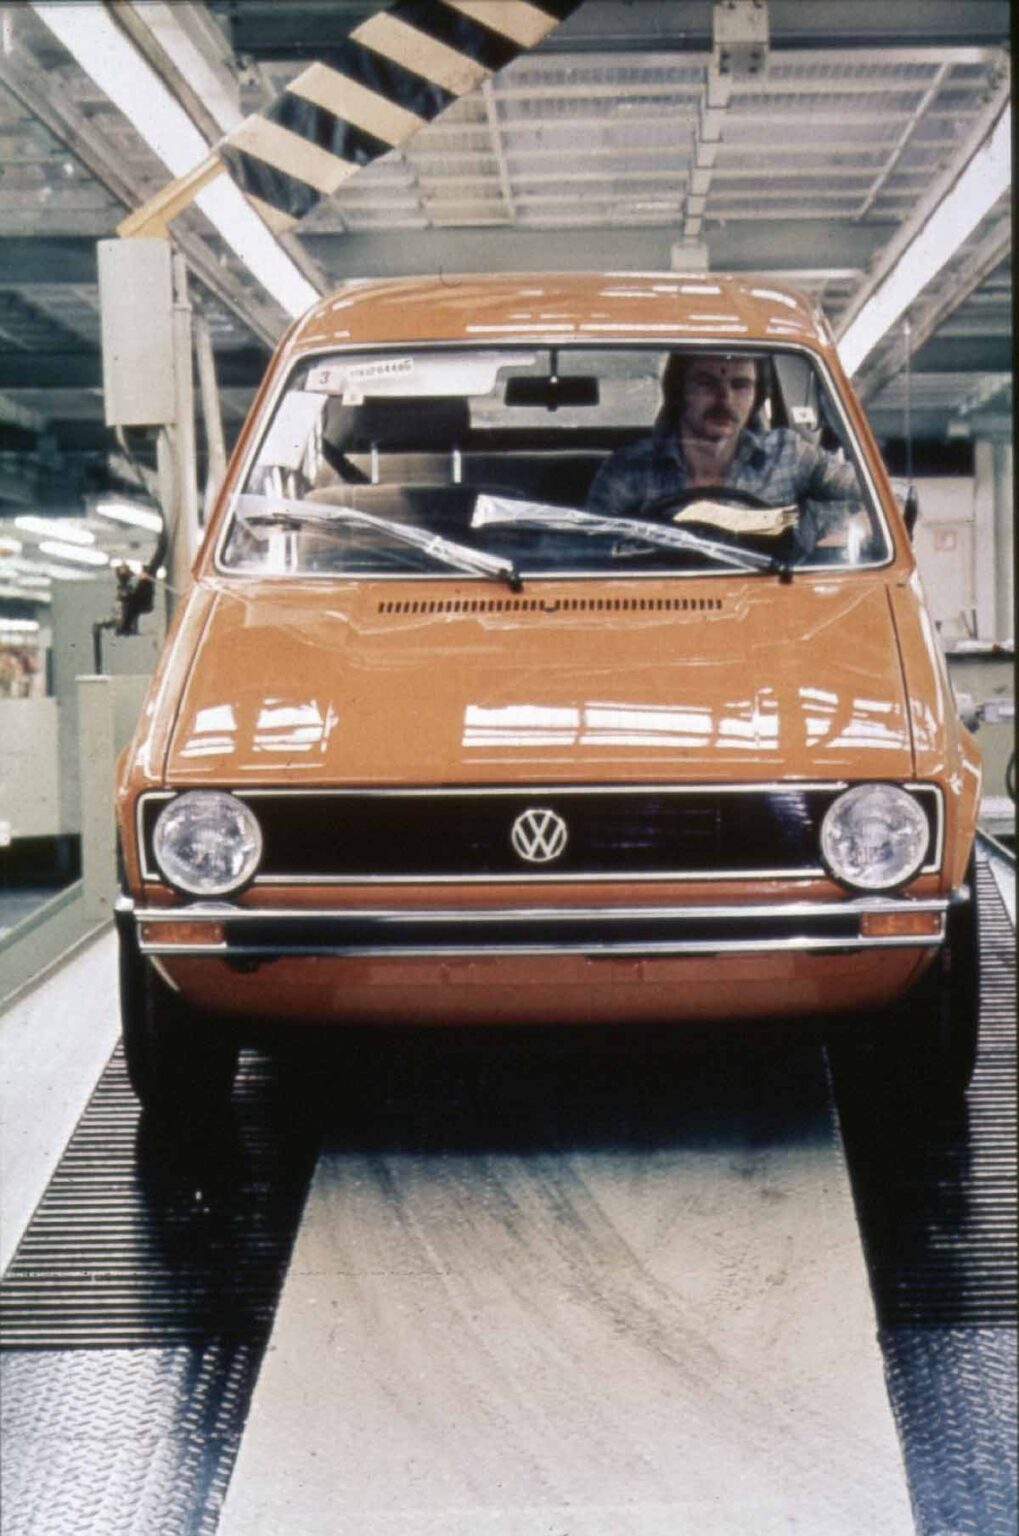 The VW Golf At 50 years Old - Production